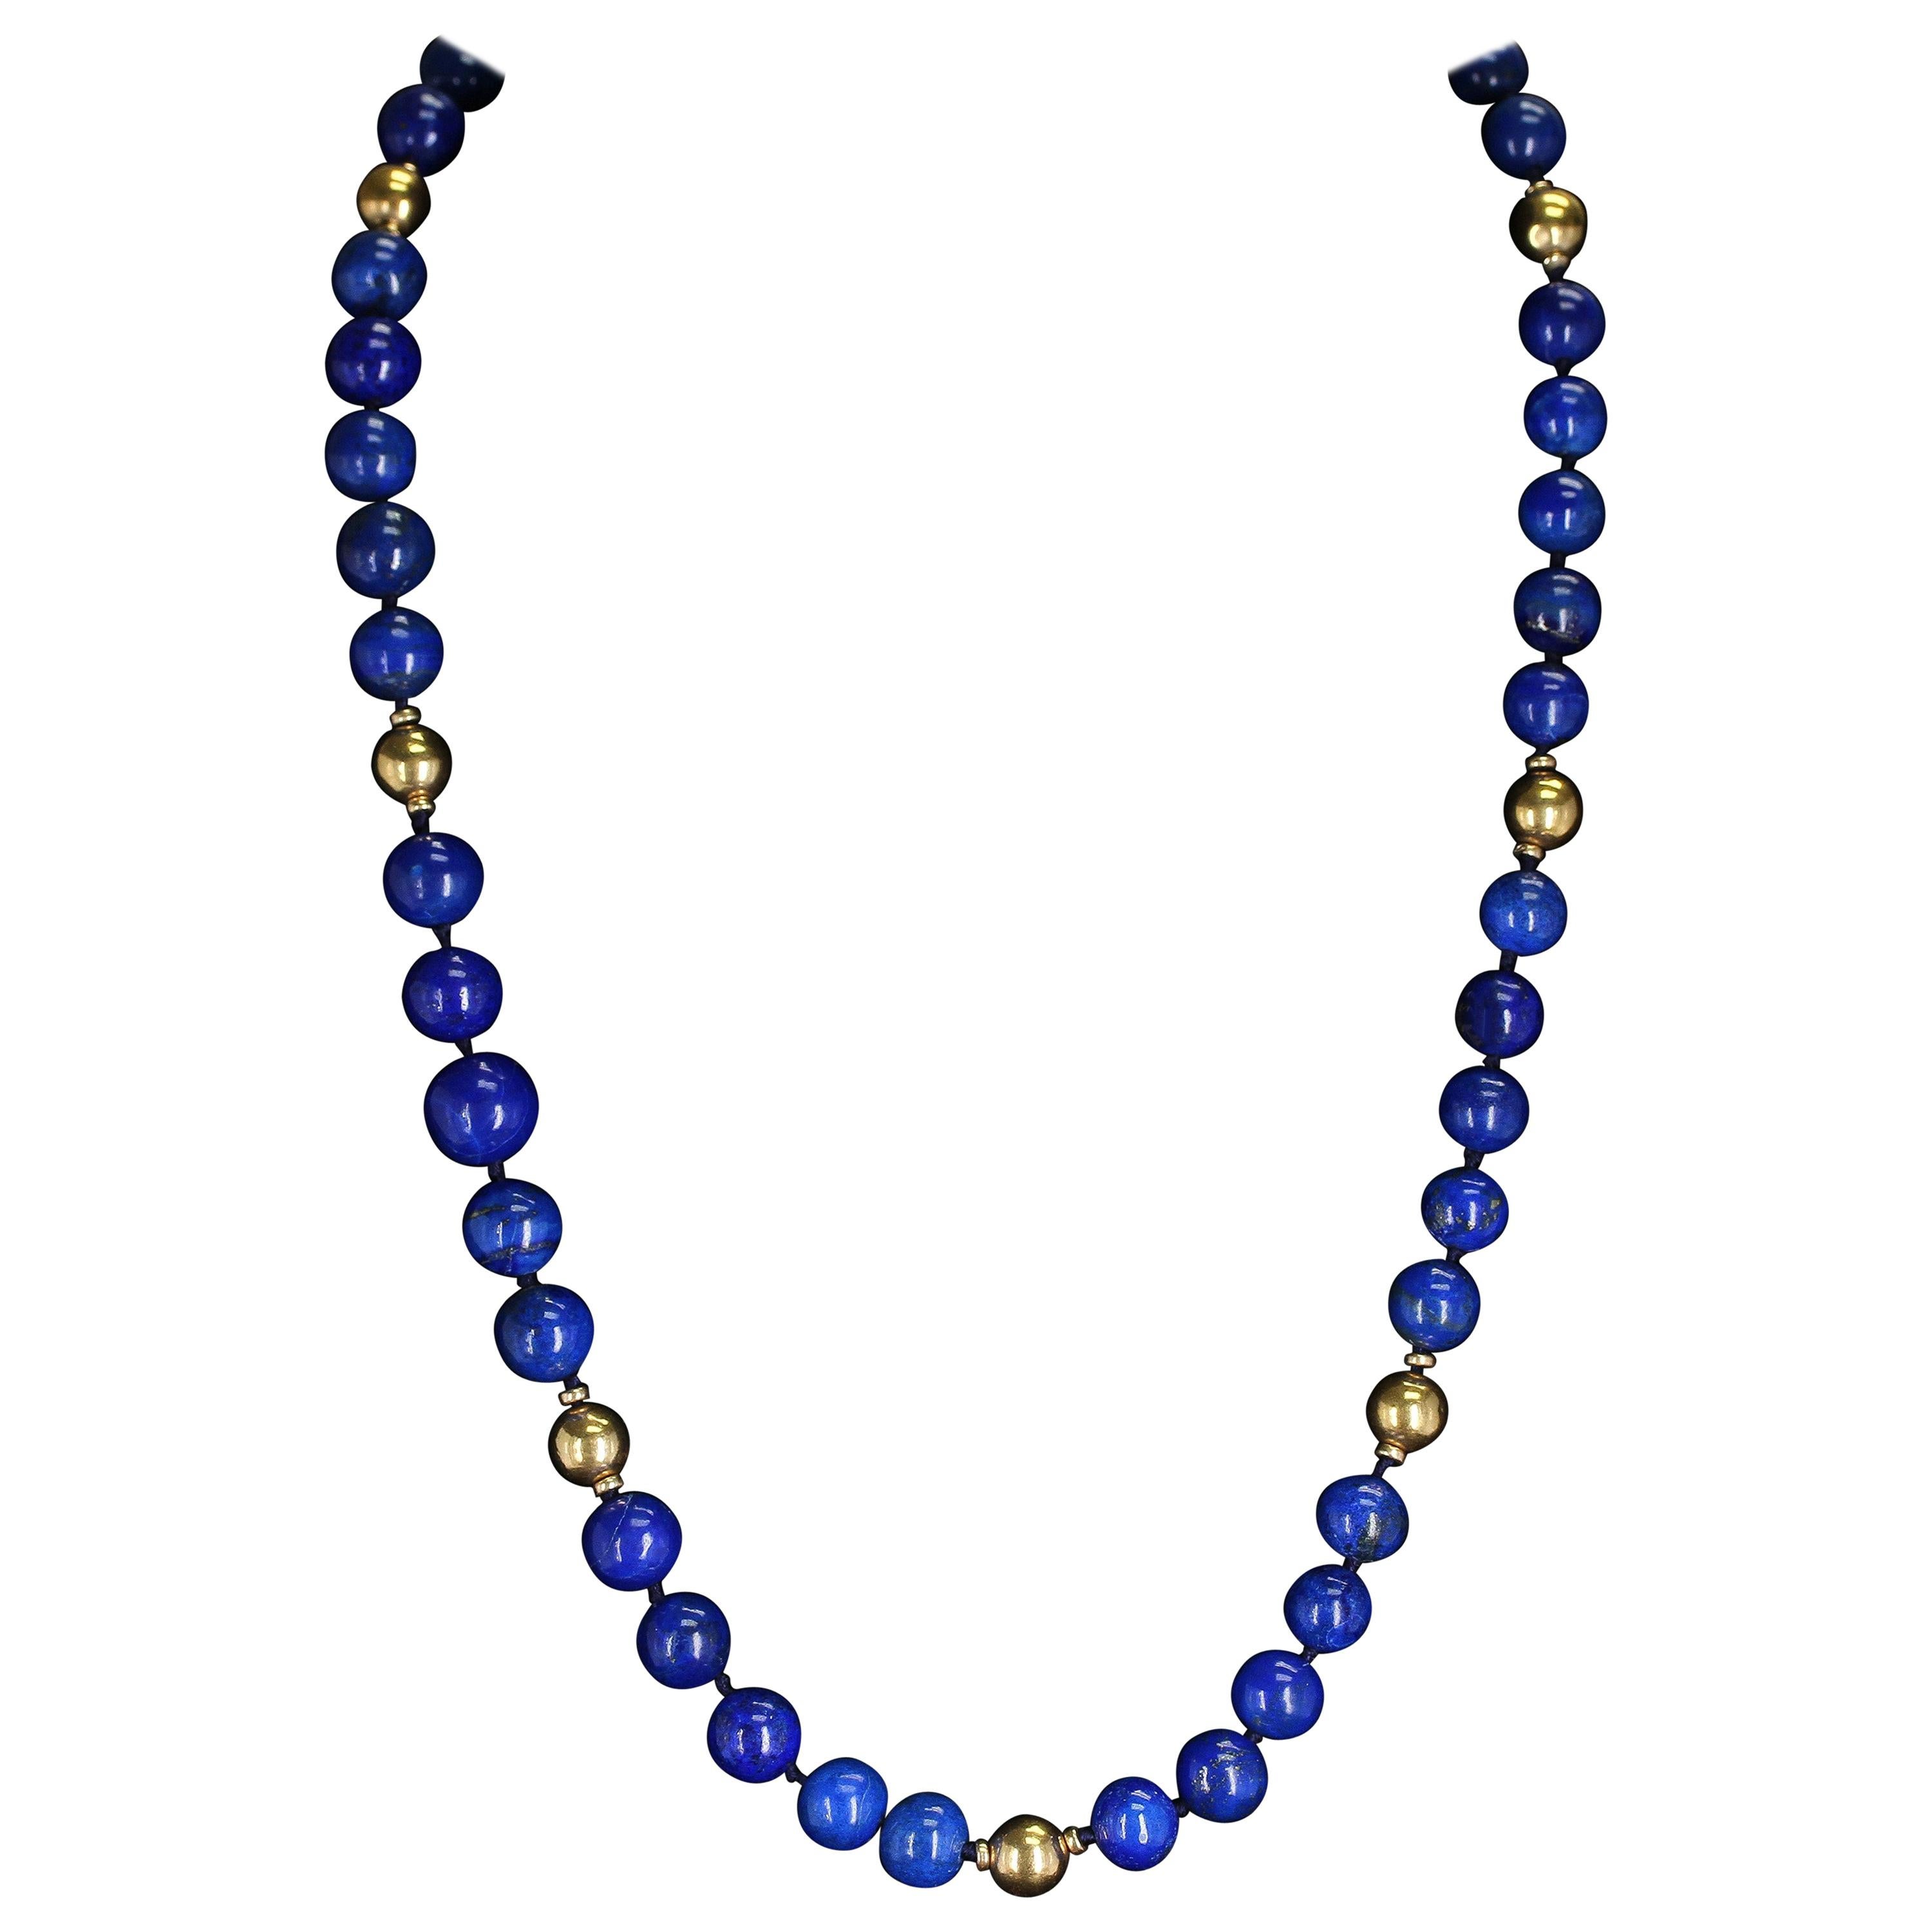 Large Round Lapis Bead Statement Necklace Gift for her Handmade Natural Lapis Round Lapis Lazuli Bead Necklace Sterling Silver Adjustable